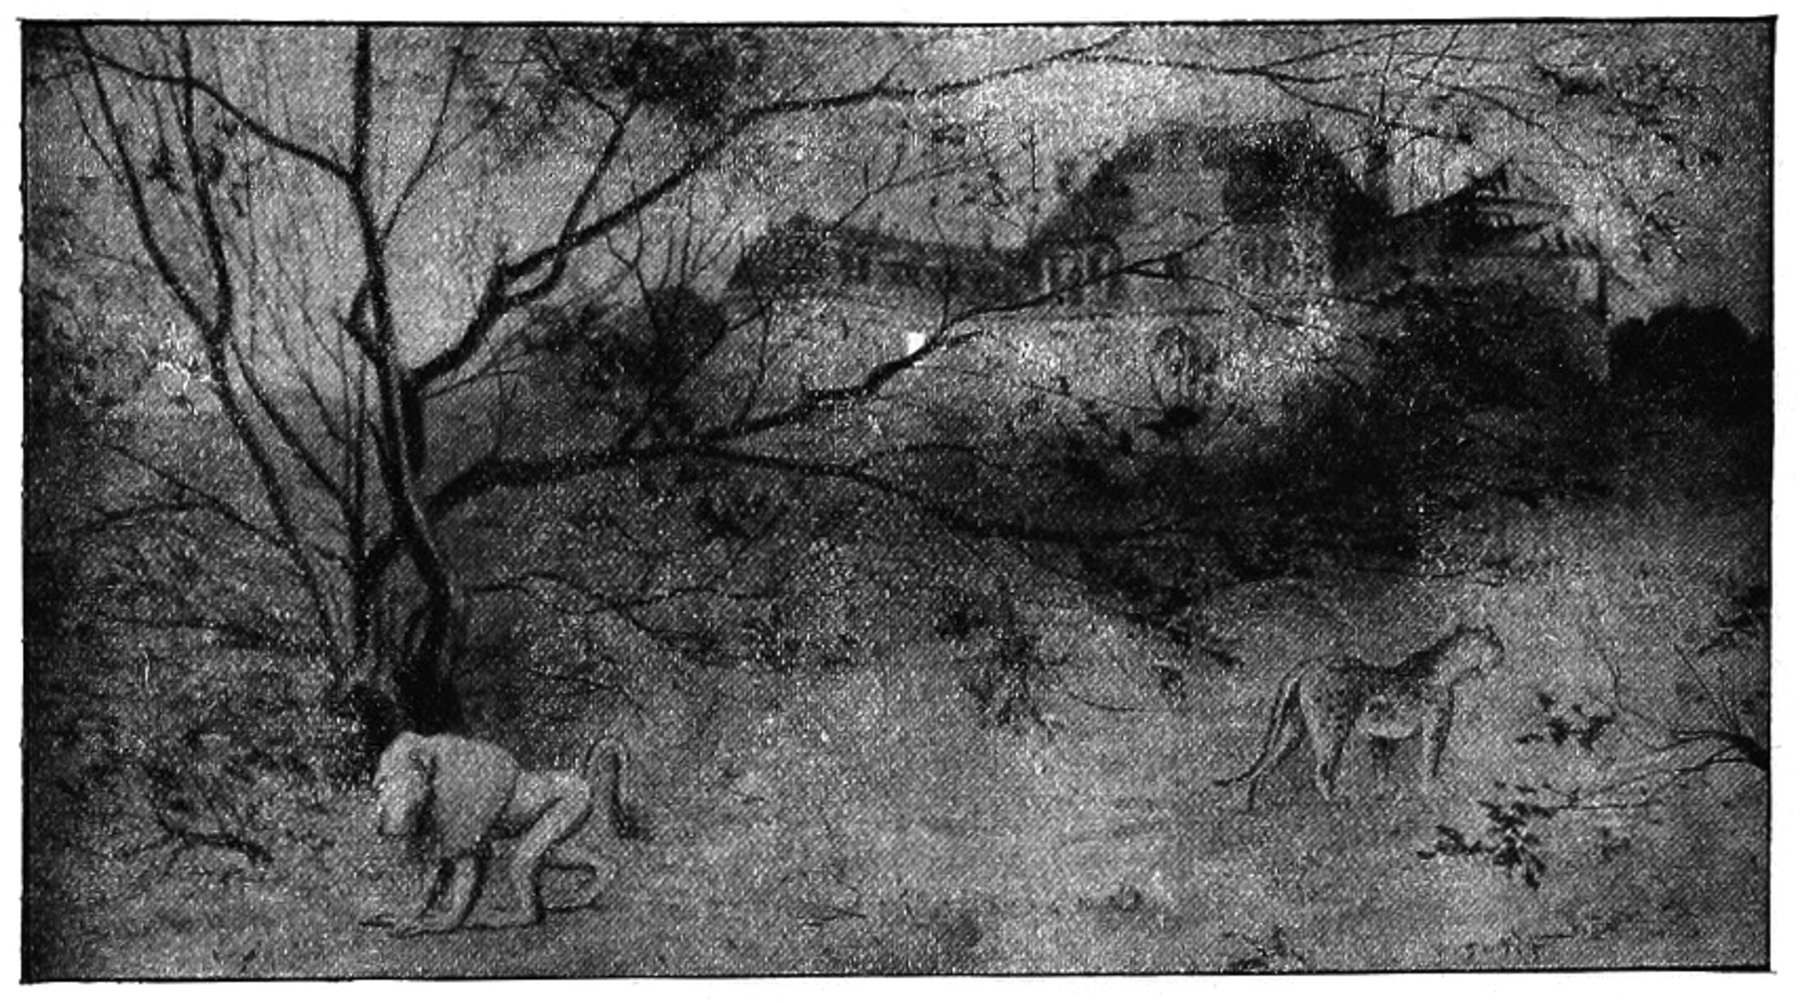 Monochrome landscape with two animals in a foggy wood with a large house in the background.